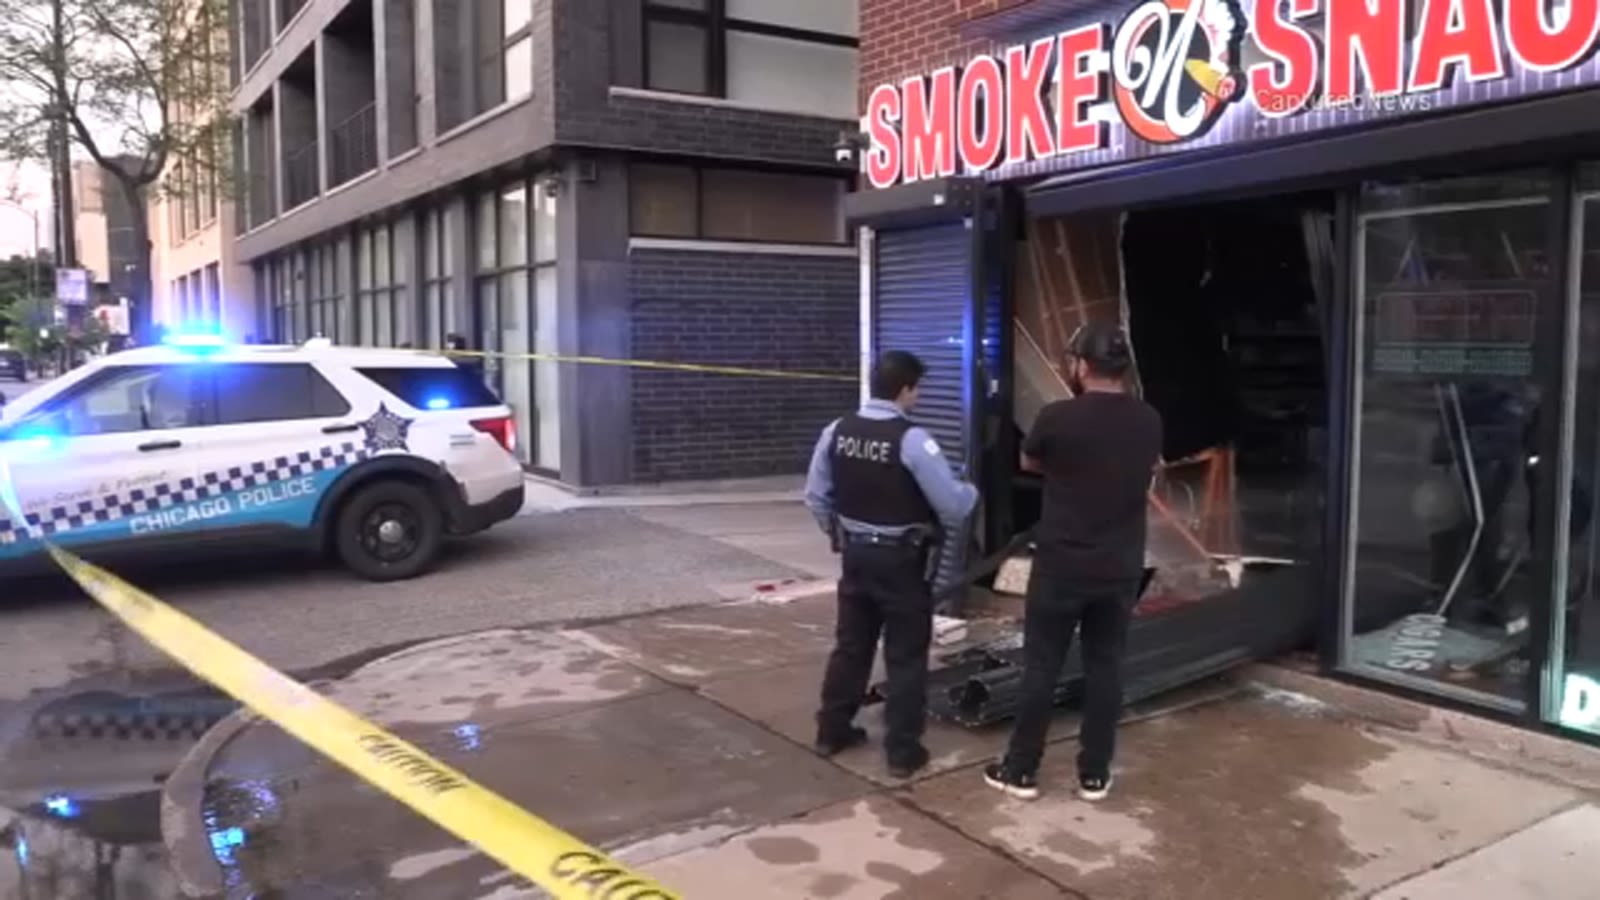 Group crashes SUV into business, takes ATM in Logan Square, Chicago police say